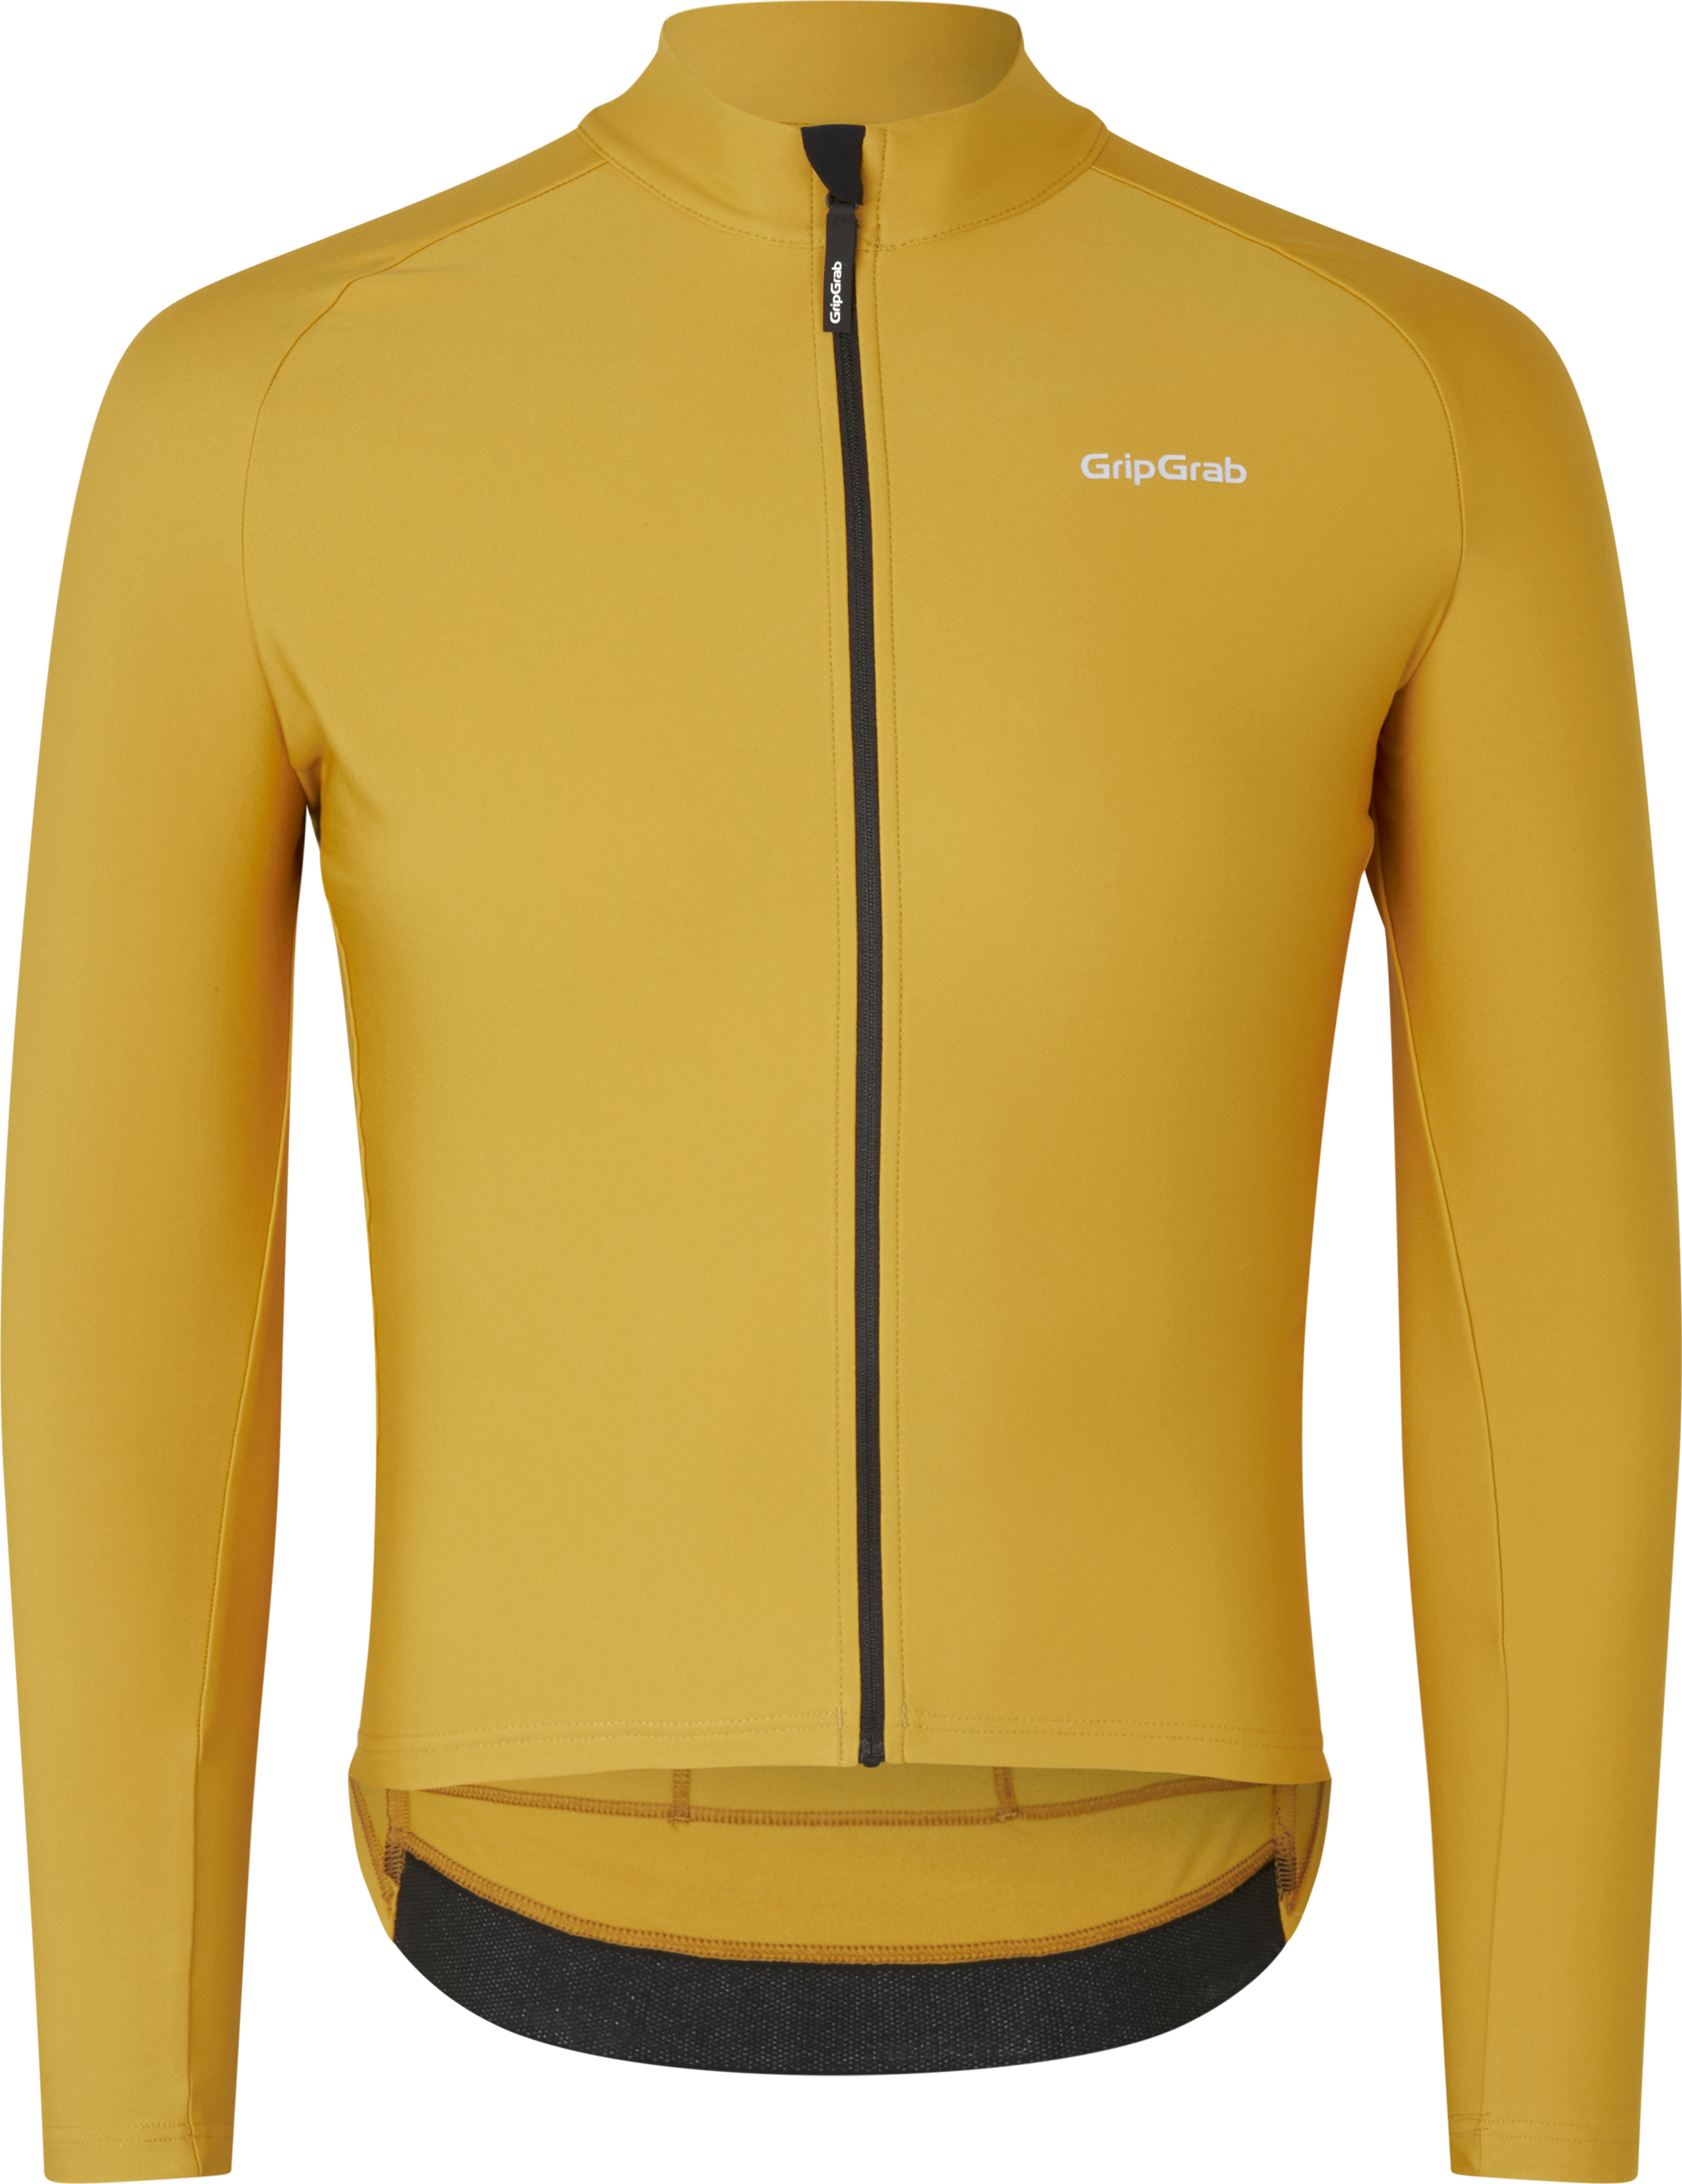 Men’s ThermaPace Thermal Long Sleeve Jersey Mustard Yellow